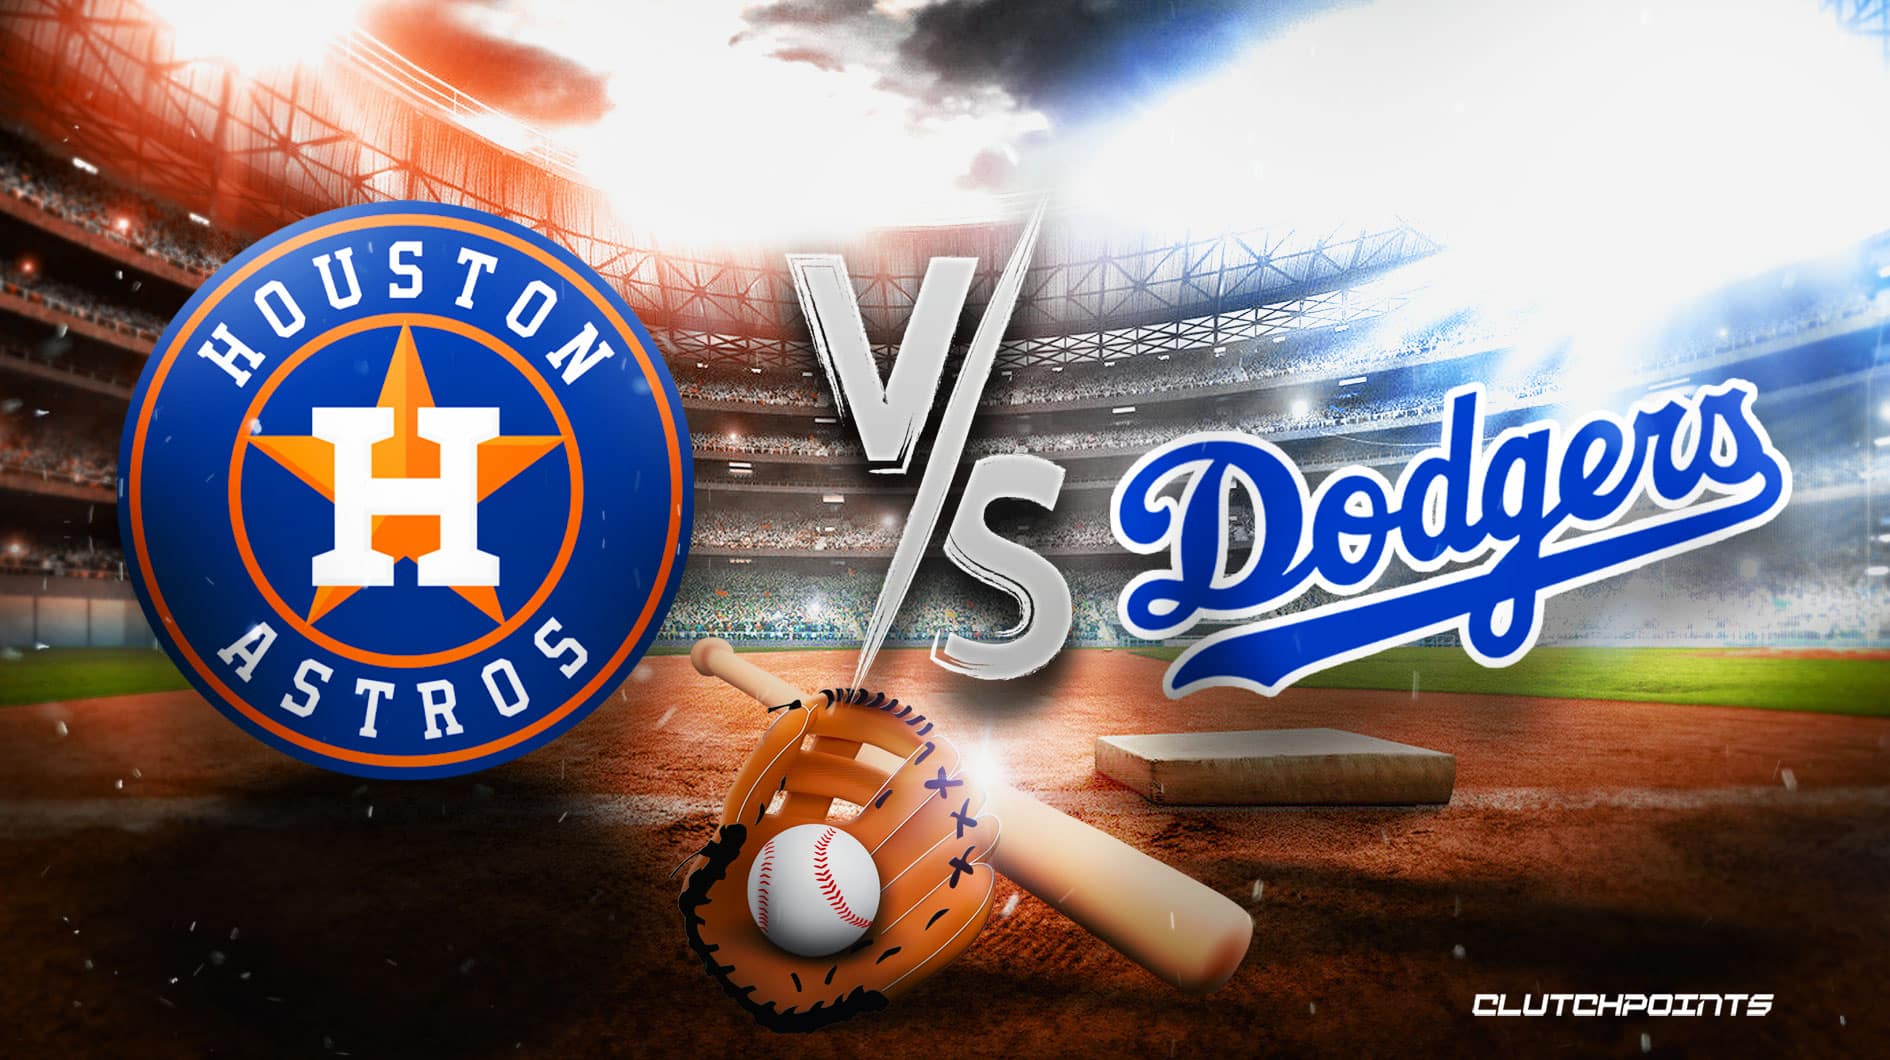 AstrosDodgers prediction, odds, pick, how to watch